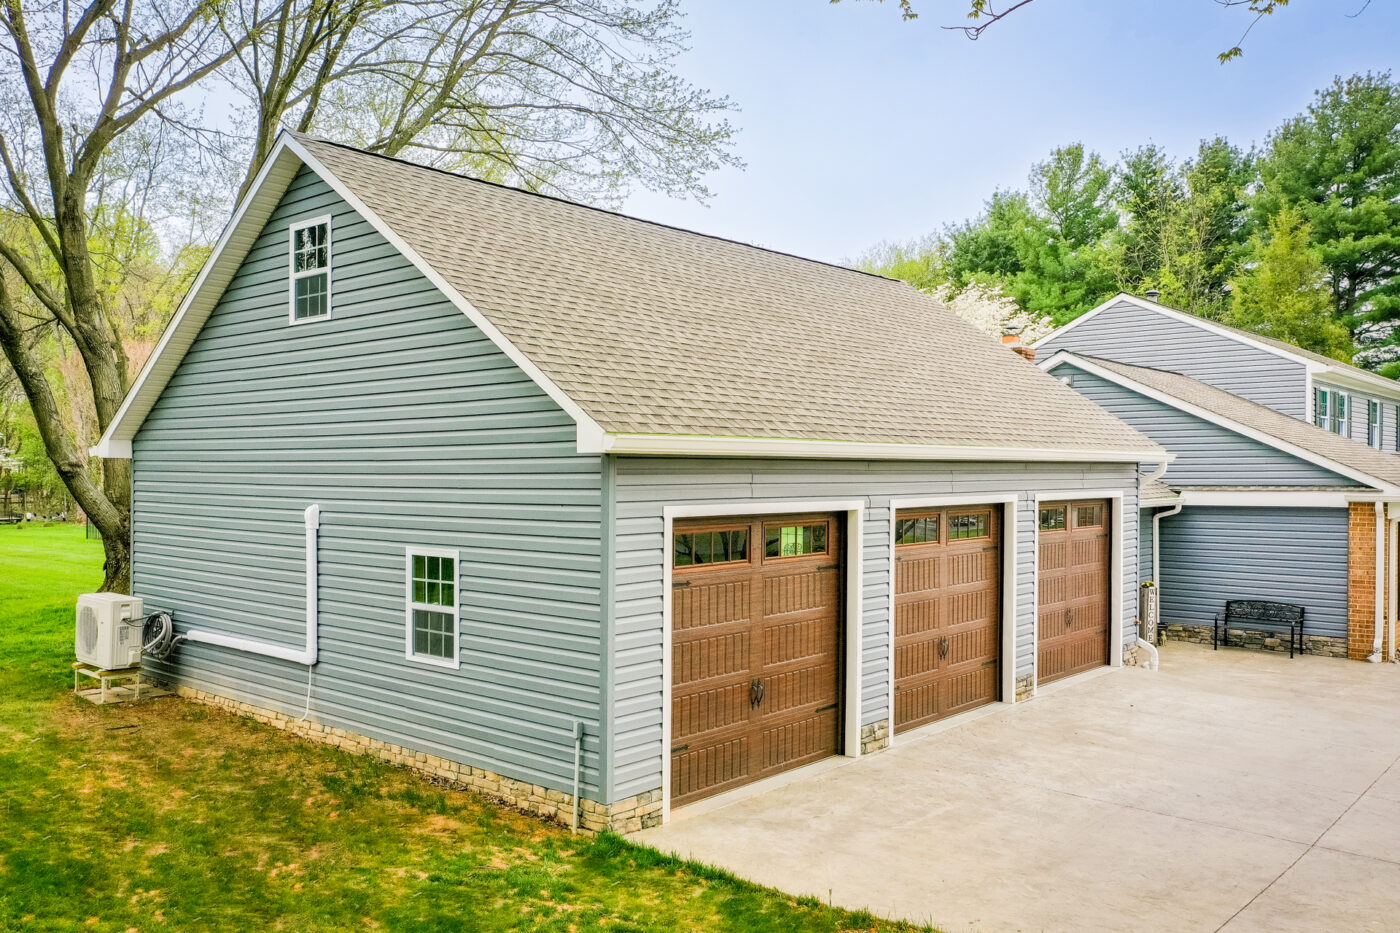 exterior of blue 3-car garage for sale in ny by green grass